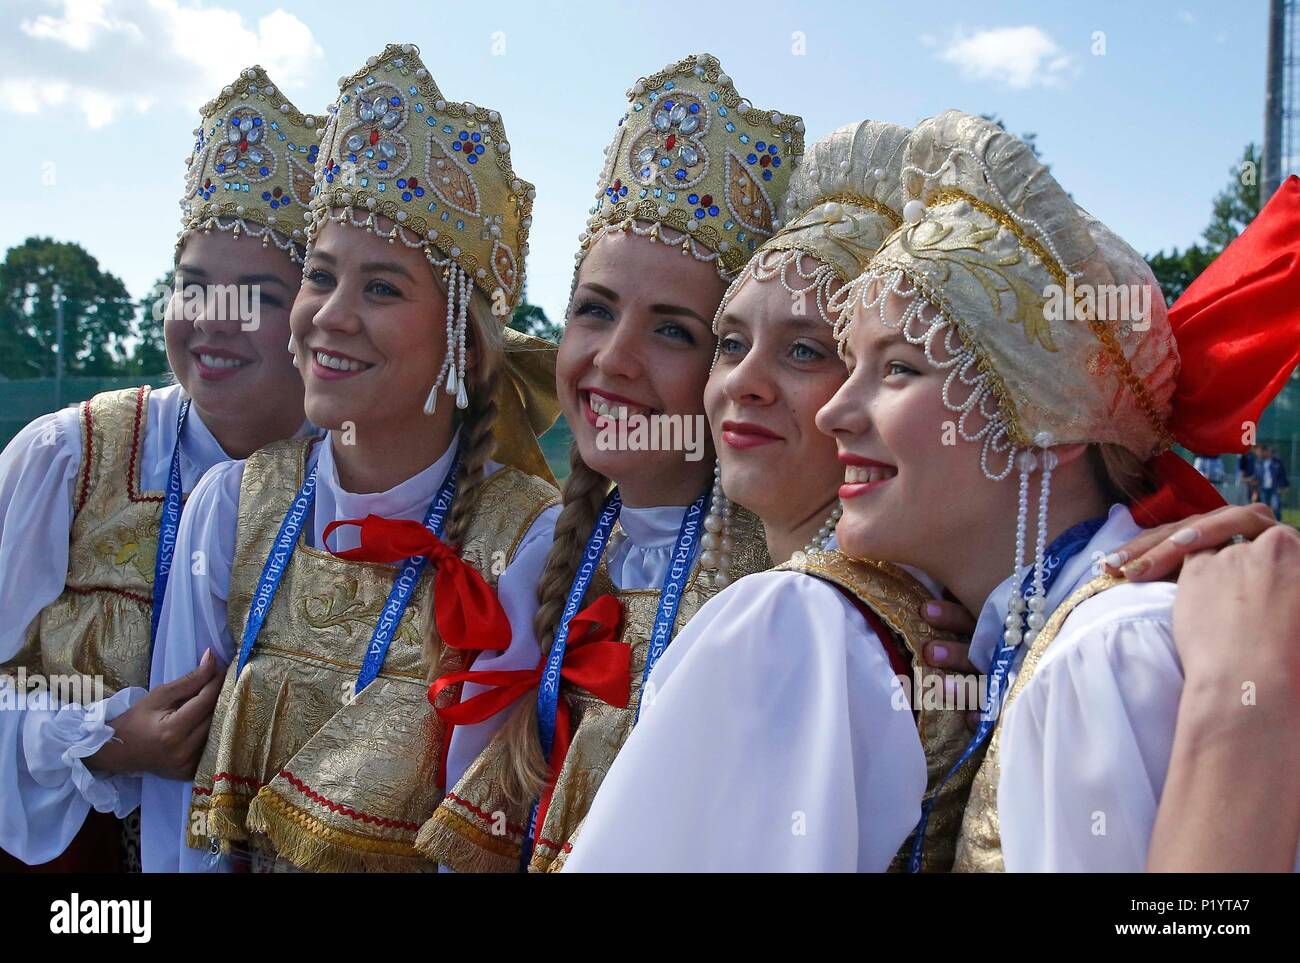 Women pose for a photo in traditional Russian clothing ahead the training session at the Spartak Zelenogorsk Stadium, Repino. PRESS ASSOCIATION Photo. Picture date: Wednesday June 13, 2018. See PA story SOCCER England. Photo credit should read: Owen Humphreys/PA Wire. Stock Photo